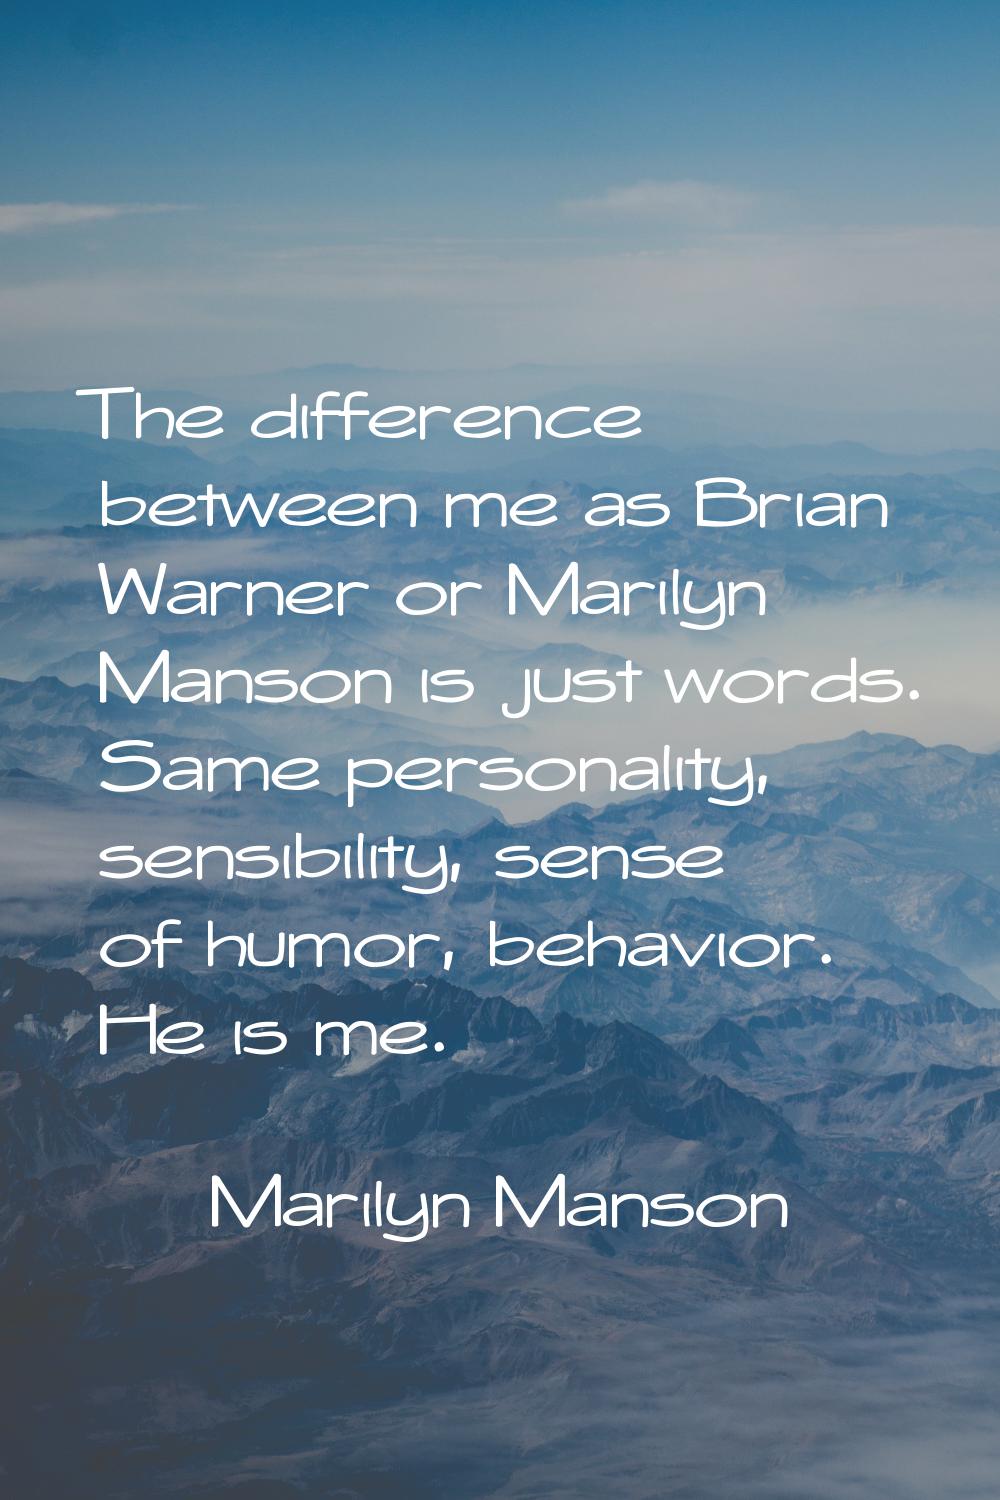 The difference between me as Brian Warner or Marilyn Manson is just words. Same personality, sensib